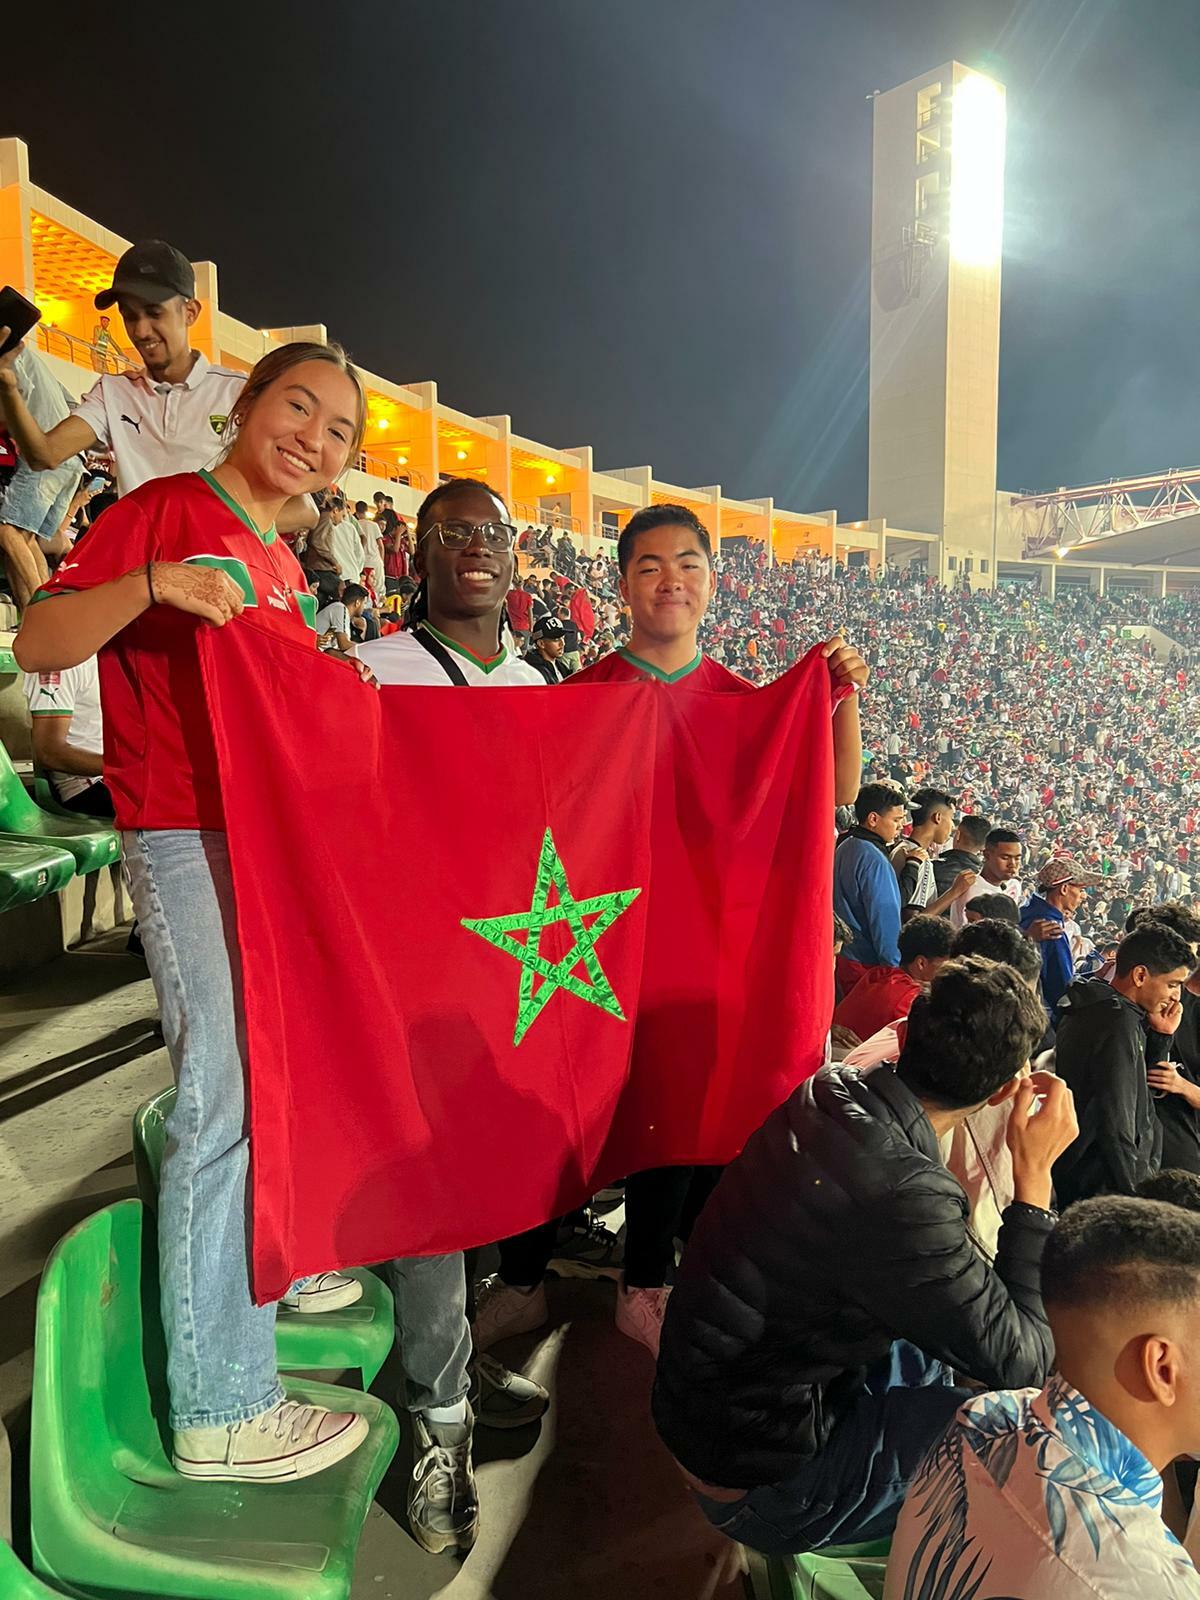 Morocco students in a soccer stadium posing with the Moroccan flag